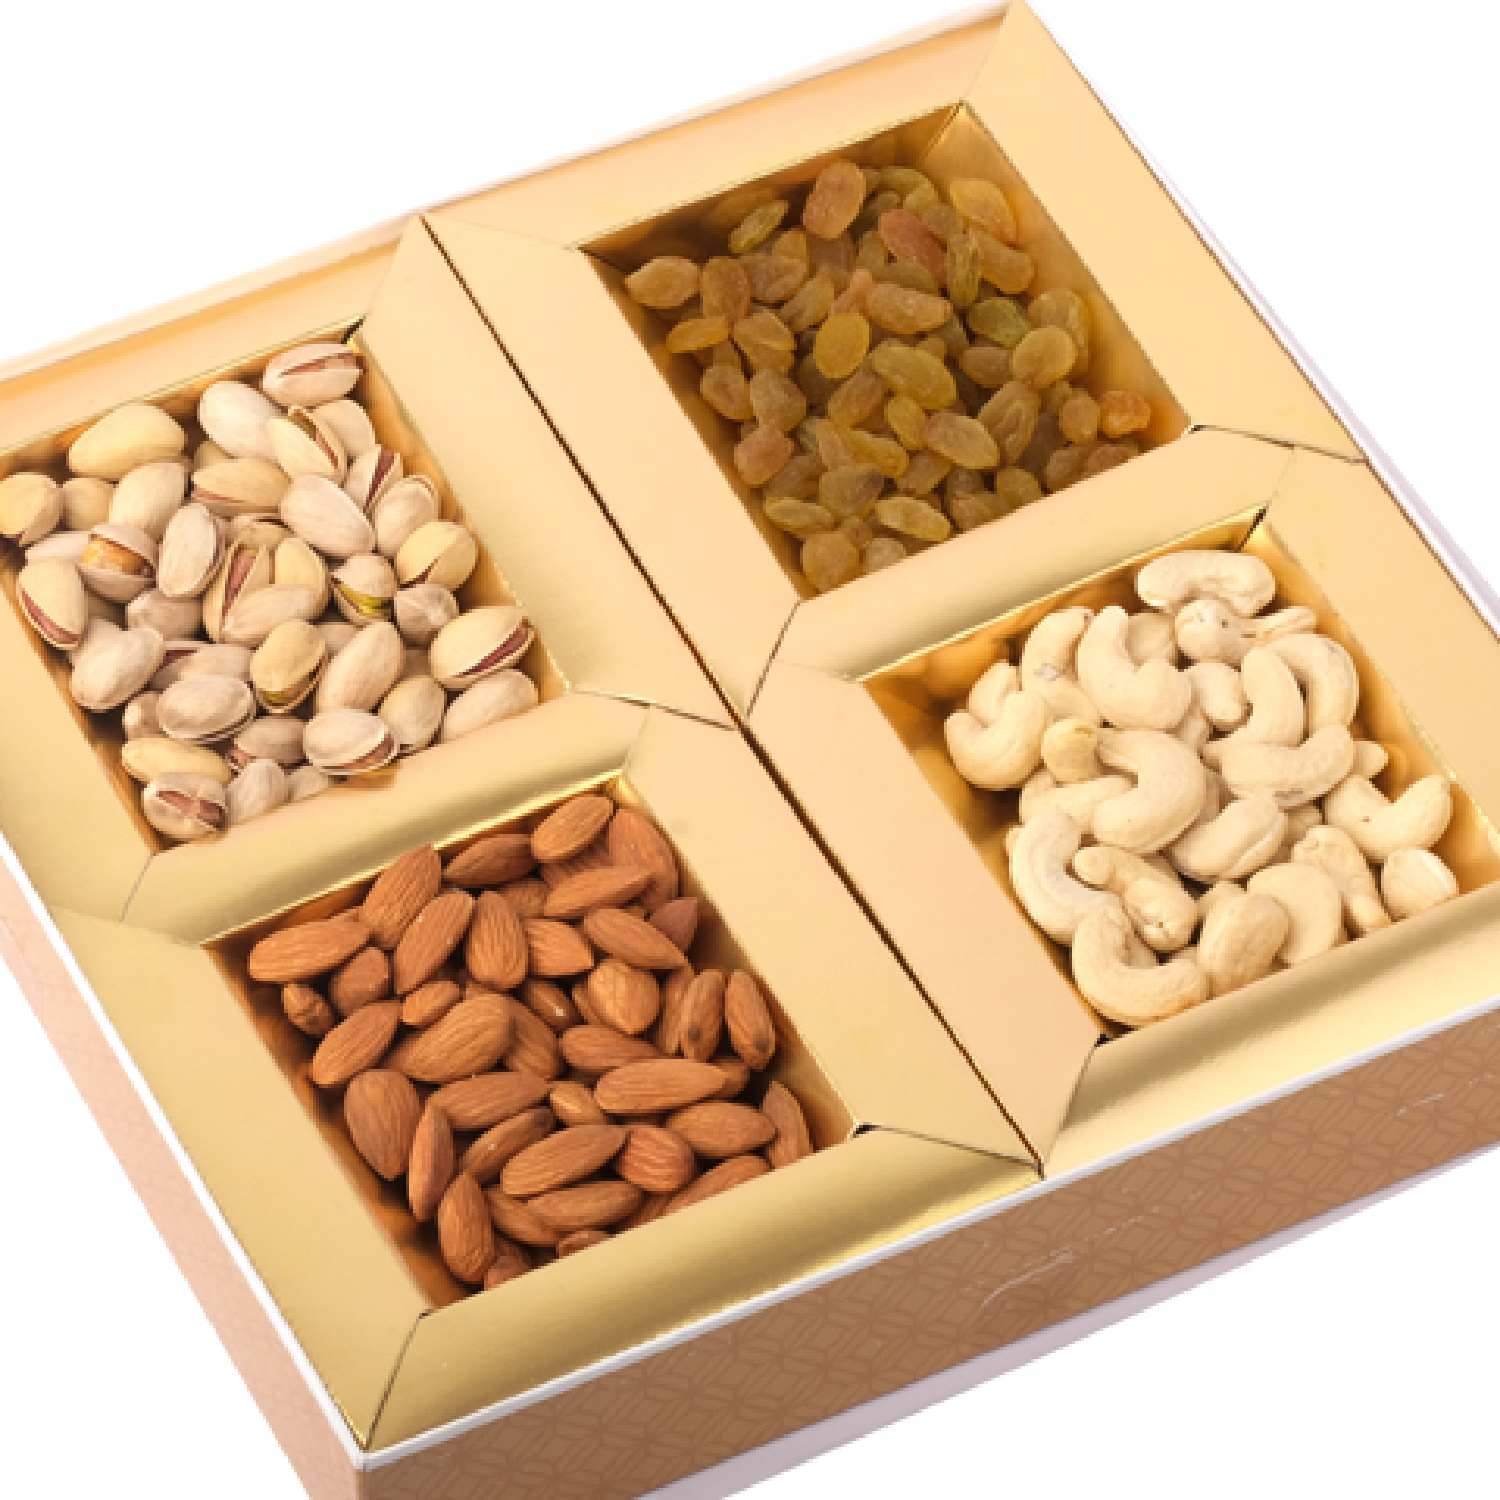 Golden State Fruit Gourmet Harvest Bloom Dried Fruit and Nut Gift Tray, 10  Pc - Walmart.com